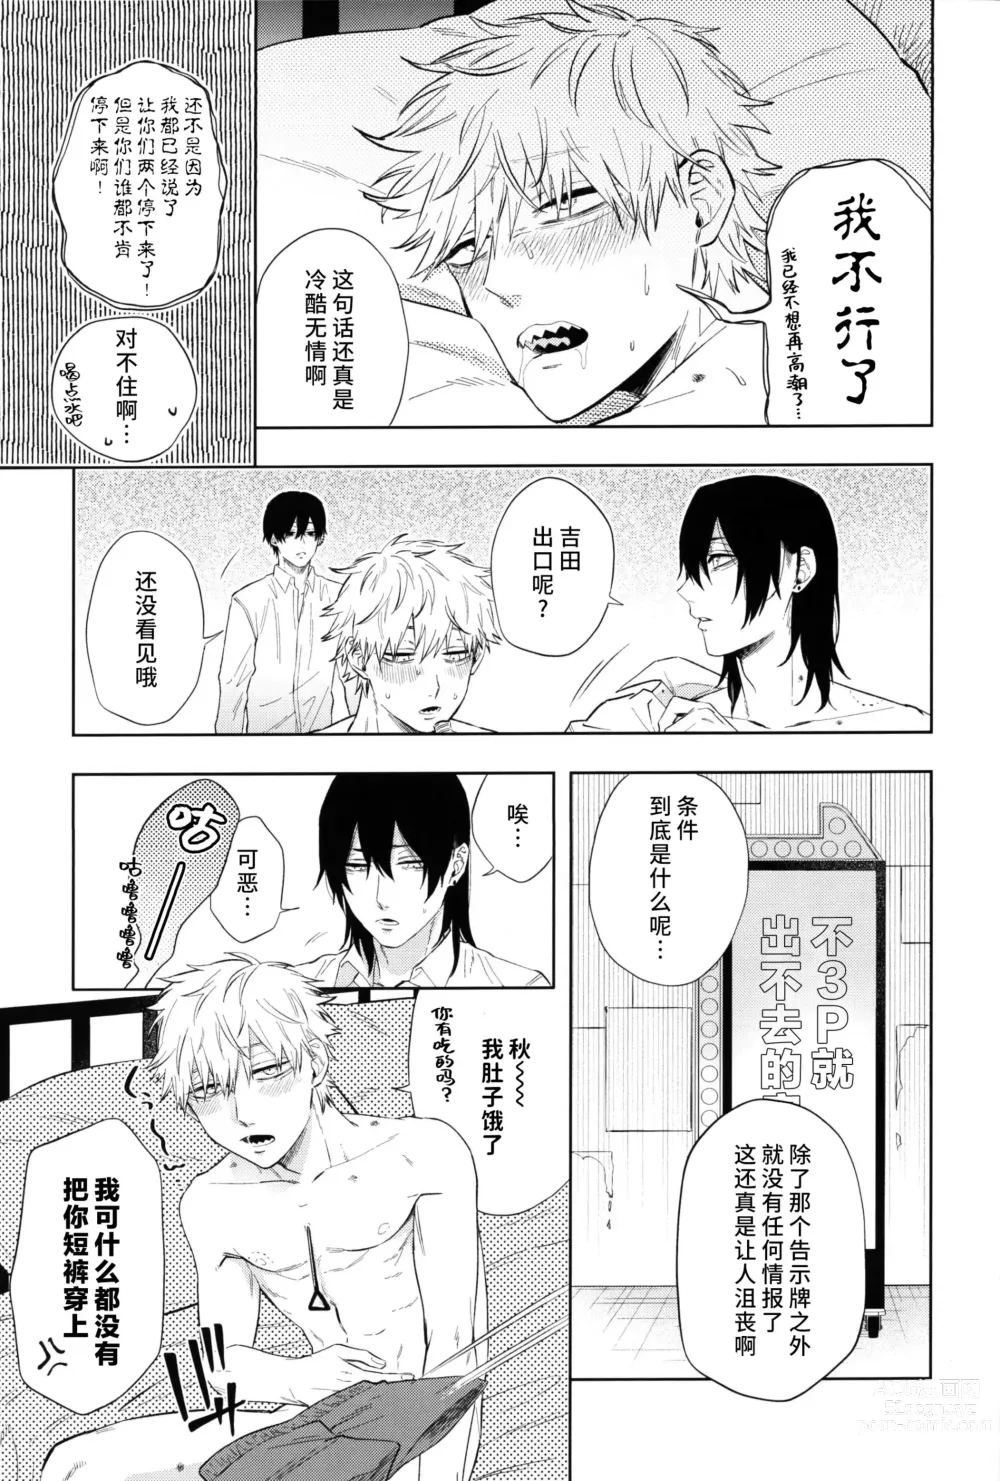 Page 40 of doujinshi Men in the Room